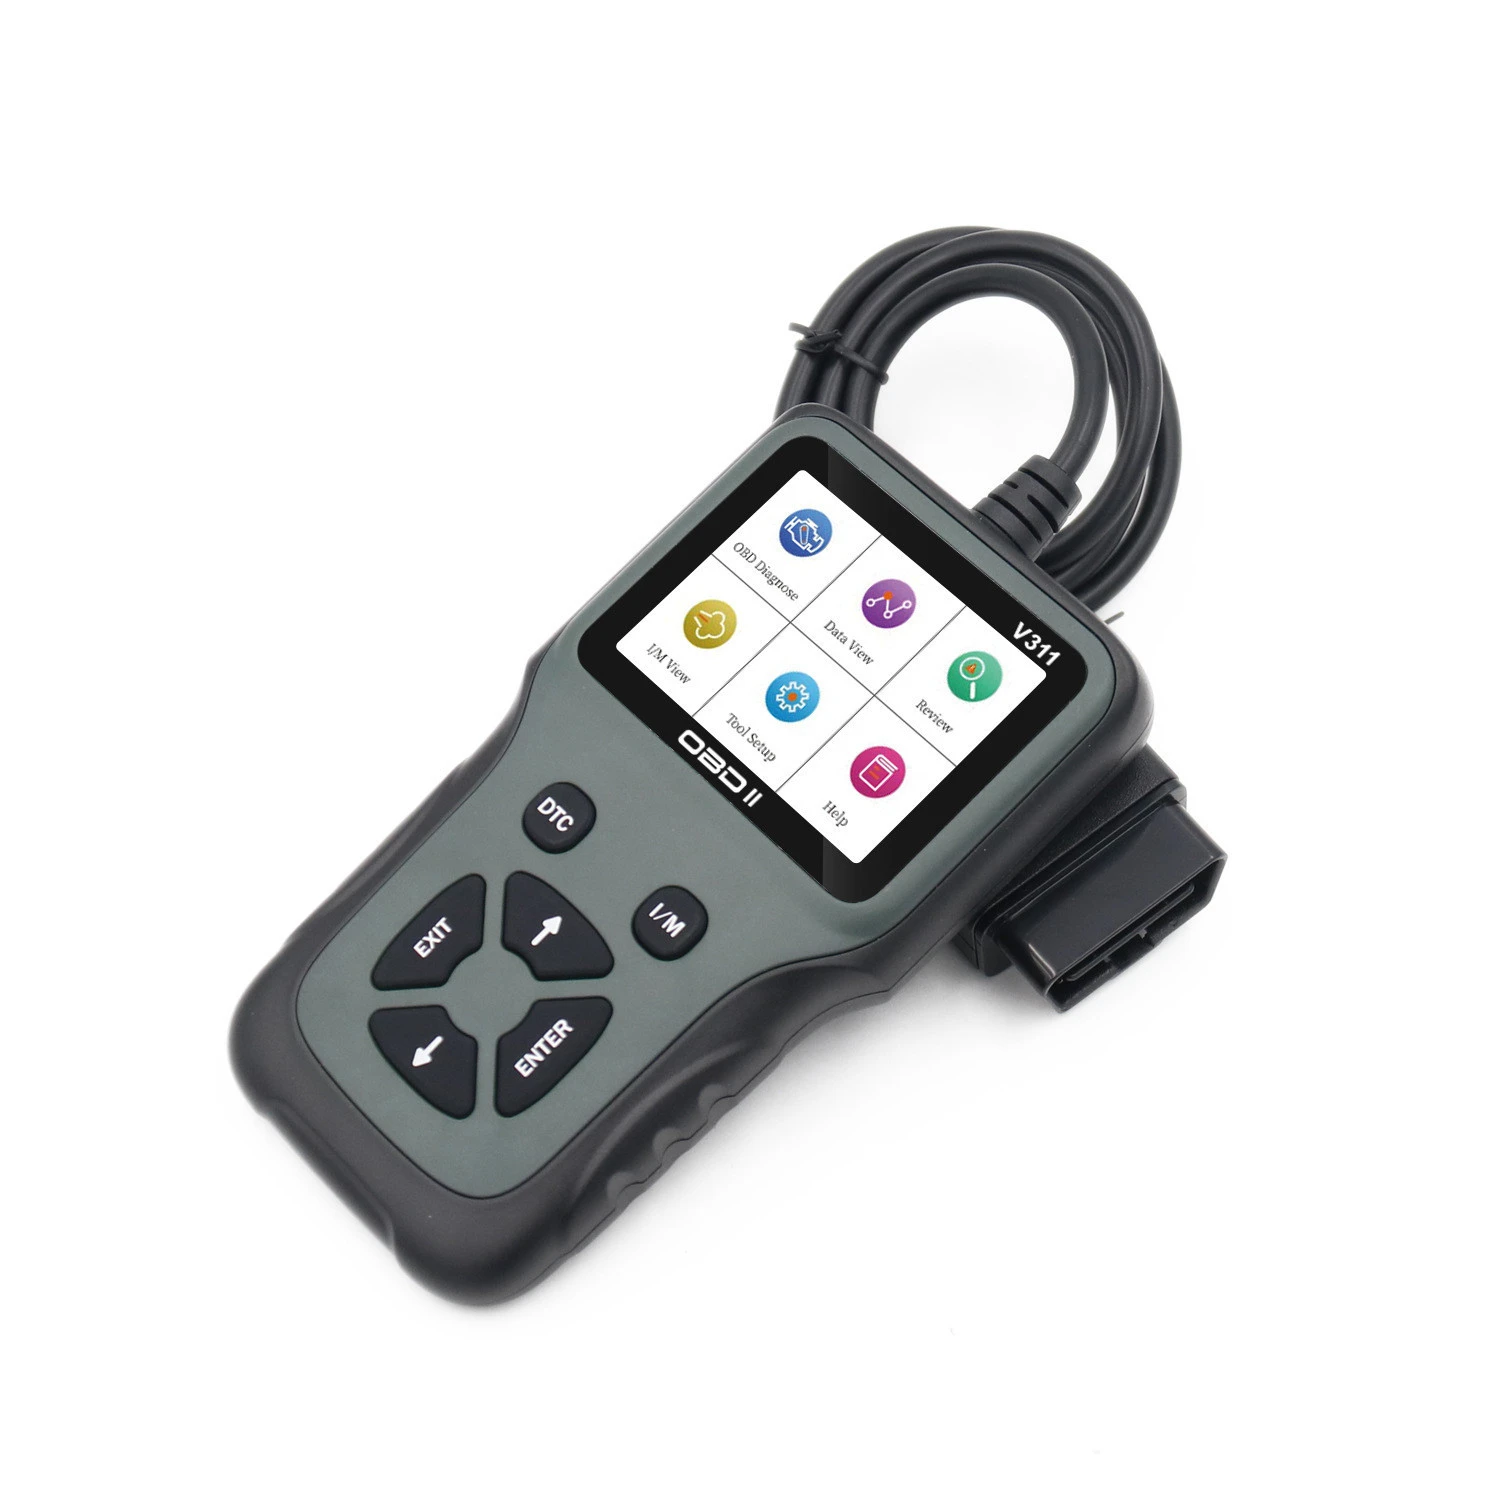 NEW OBDII Read code Read Freeze Frame data vehicle information For Windows auto diagnostic tool